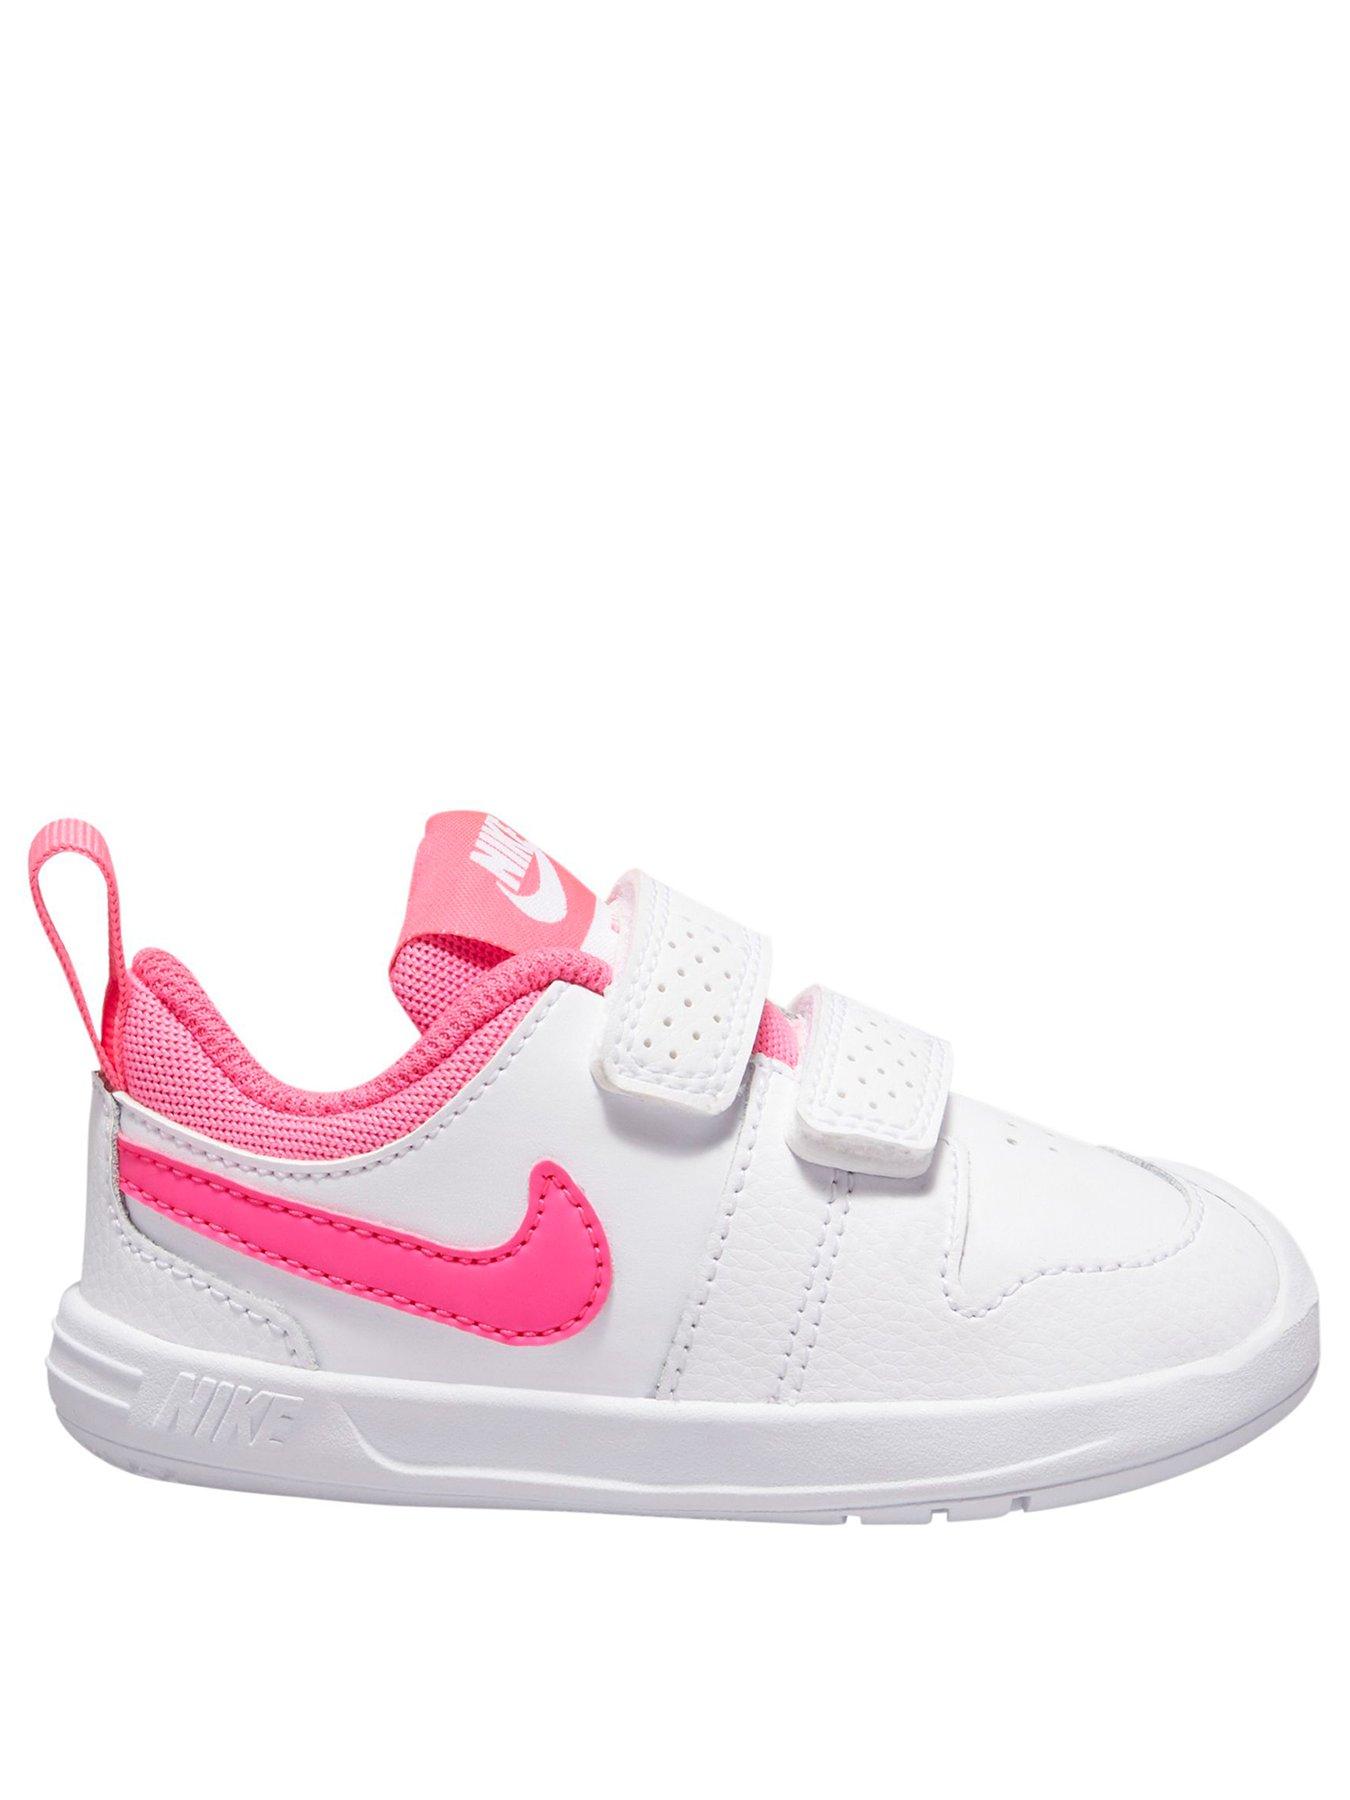 Infant Trainers | Infant Shoes | Very.co.uk